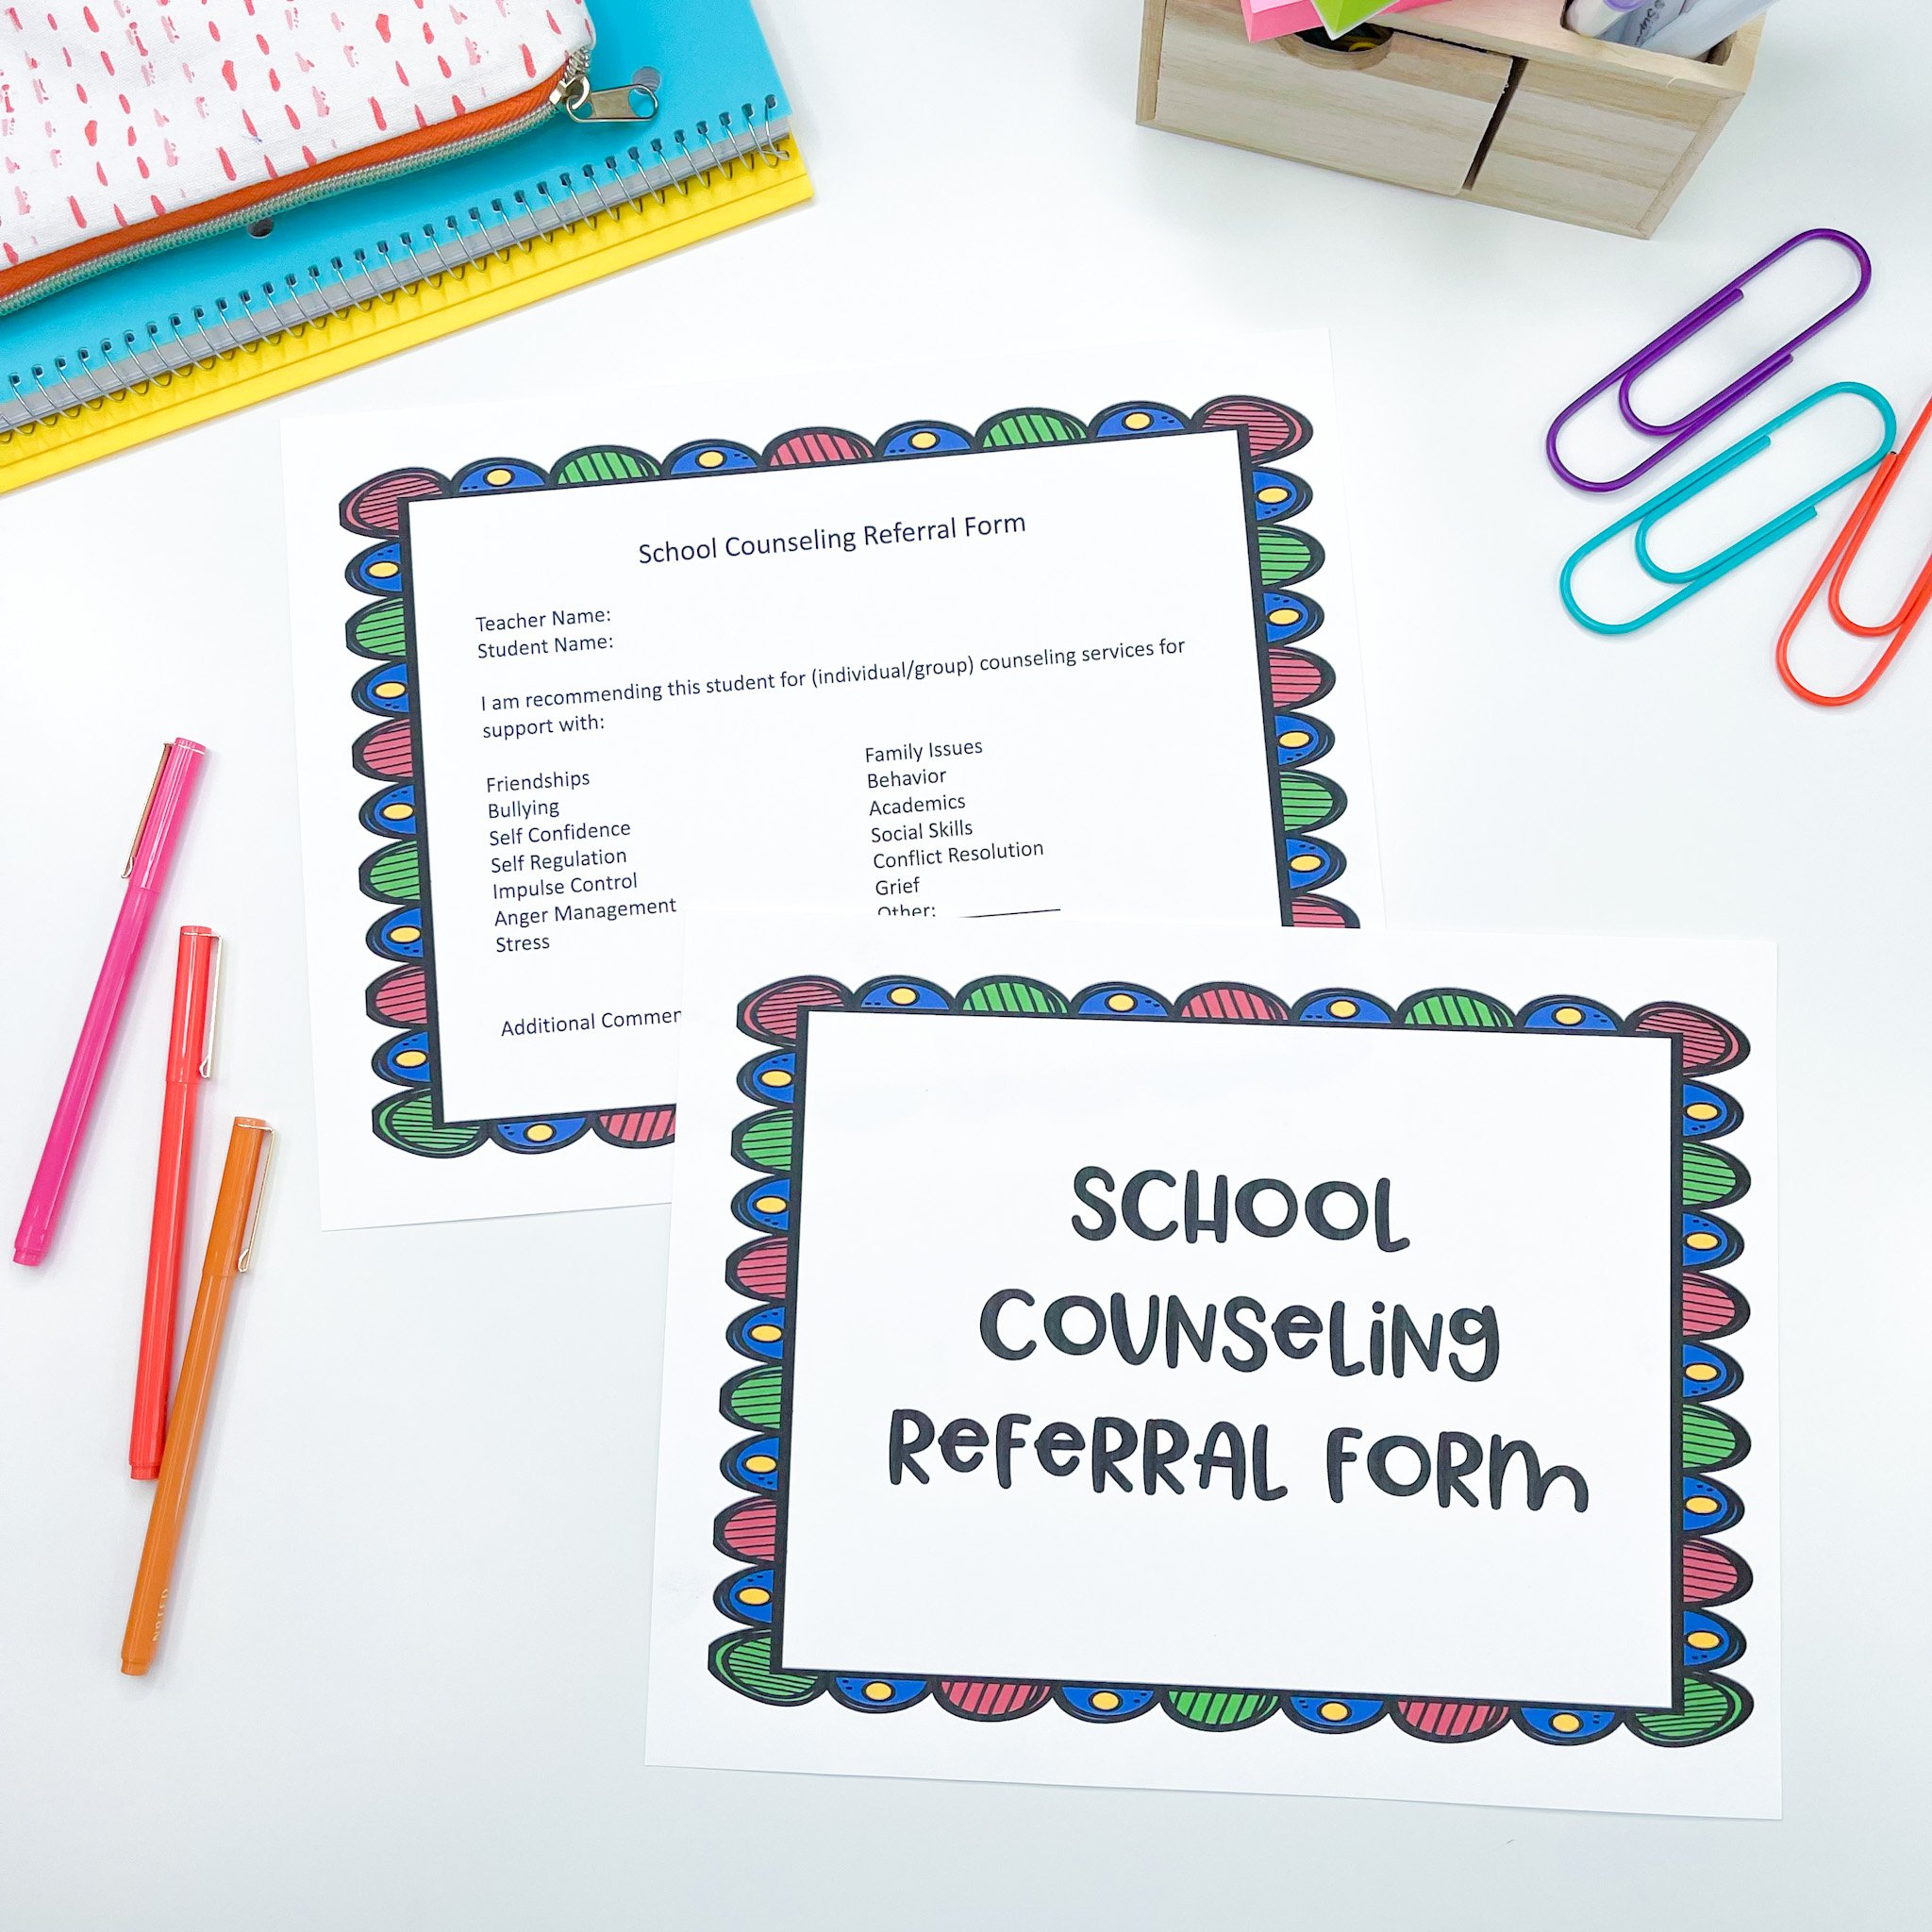 printed referral form